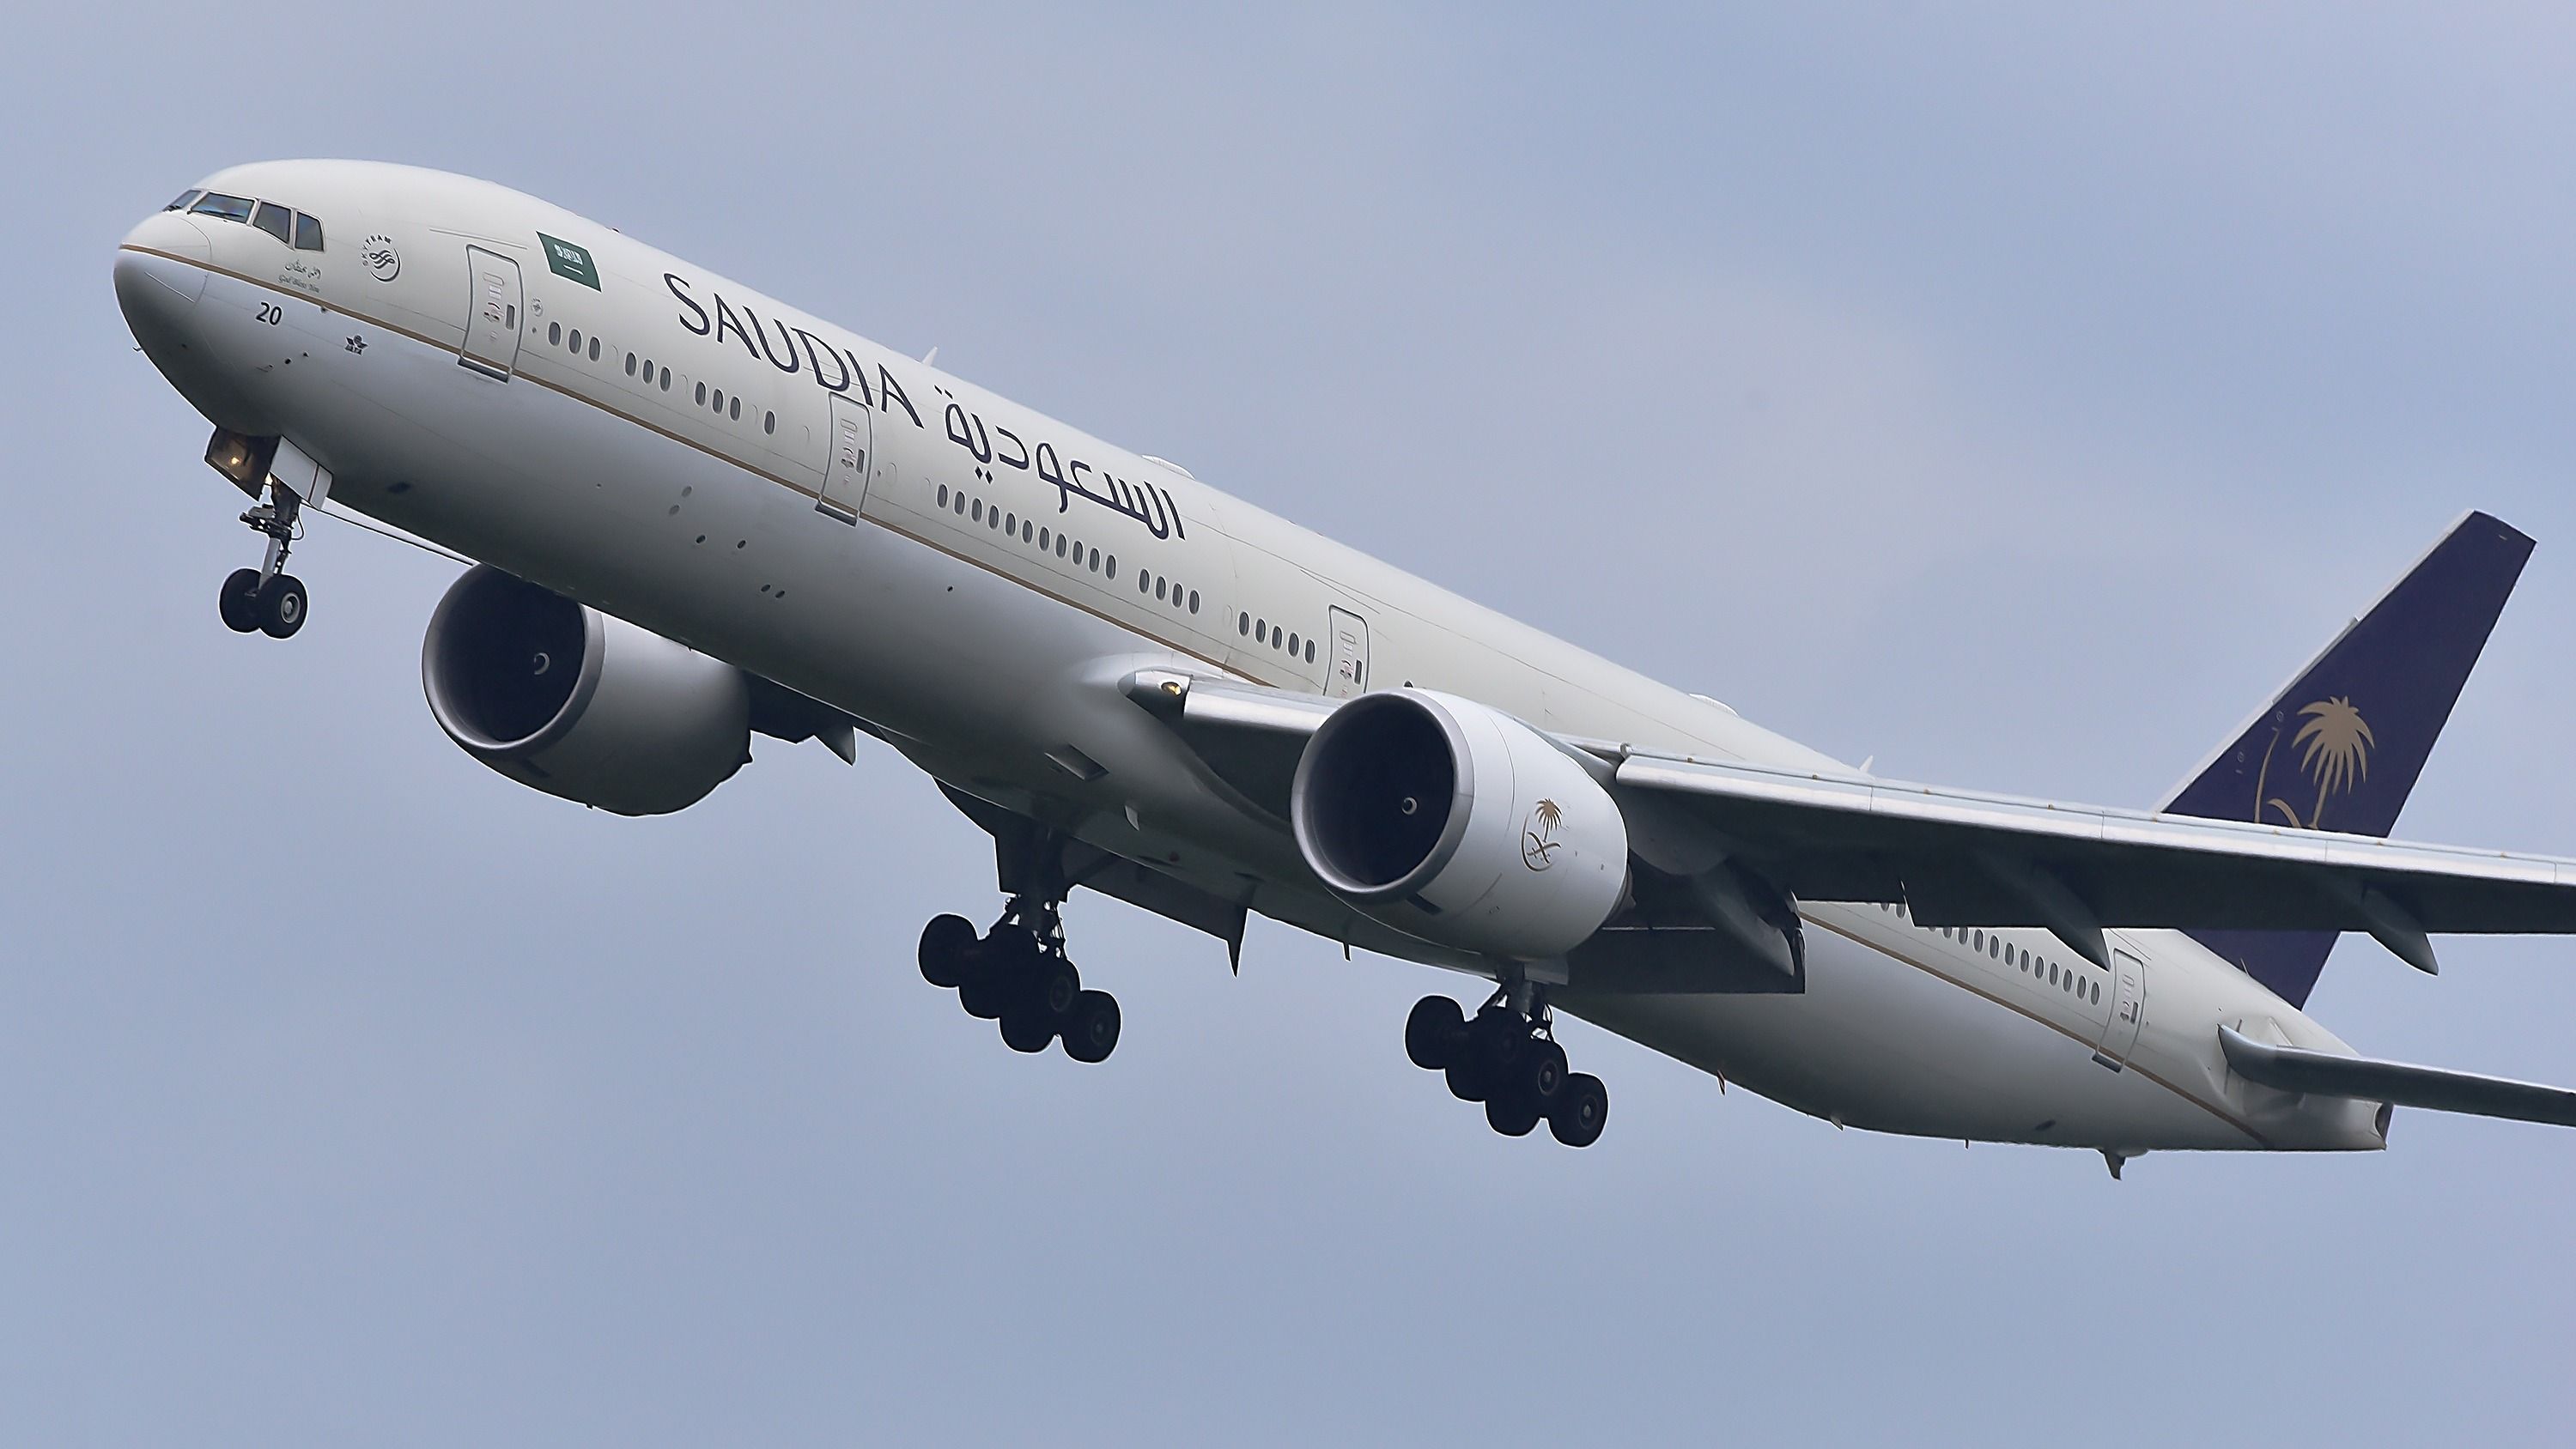 Saudia Boeing 777 over airport.